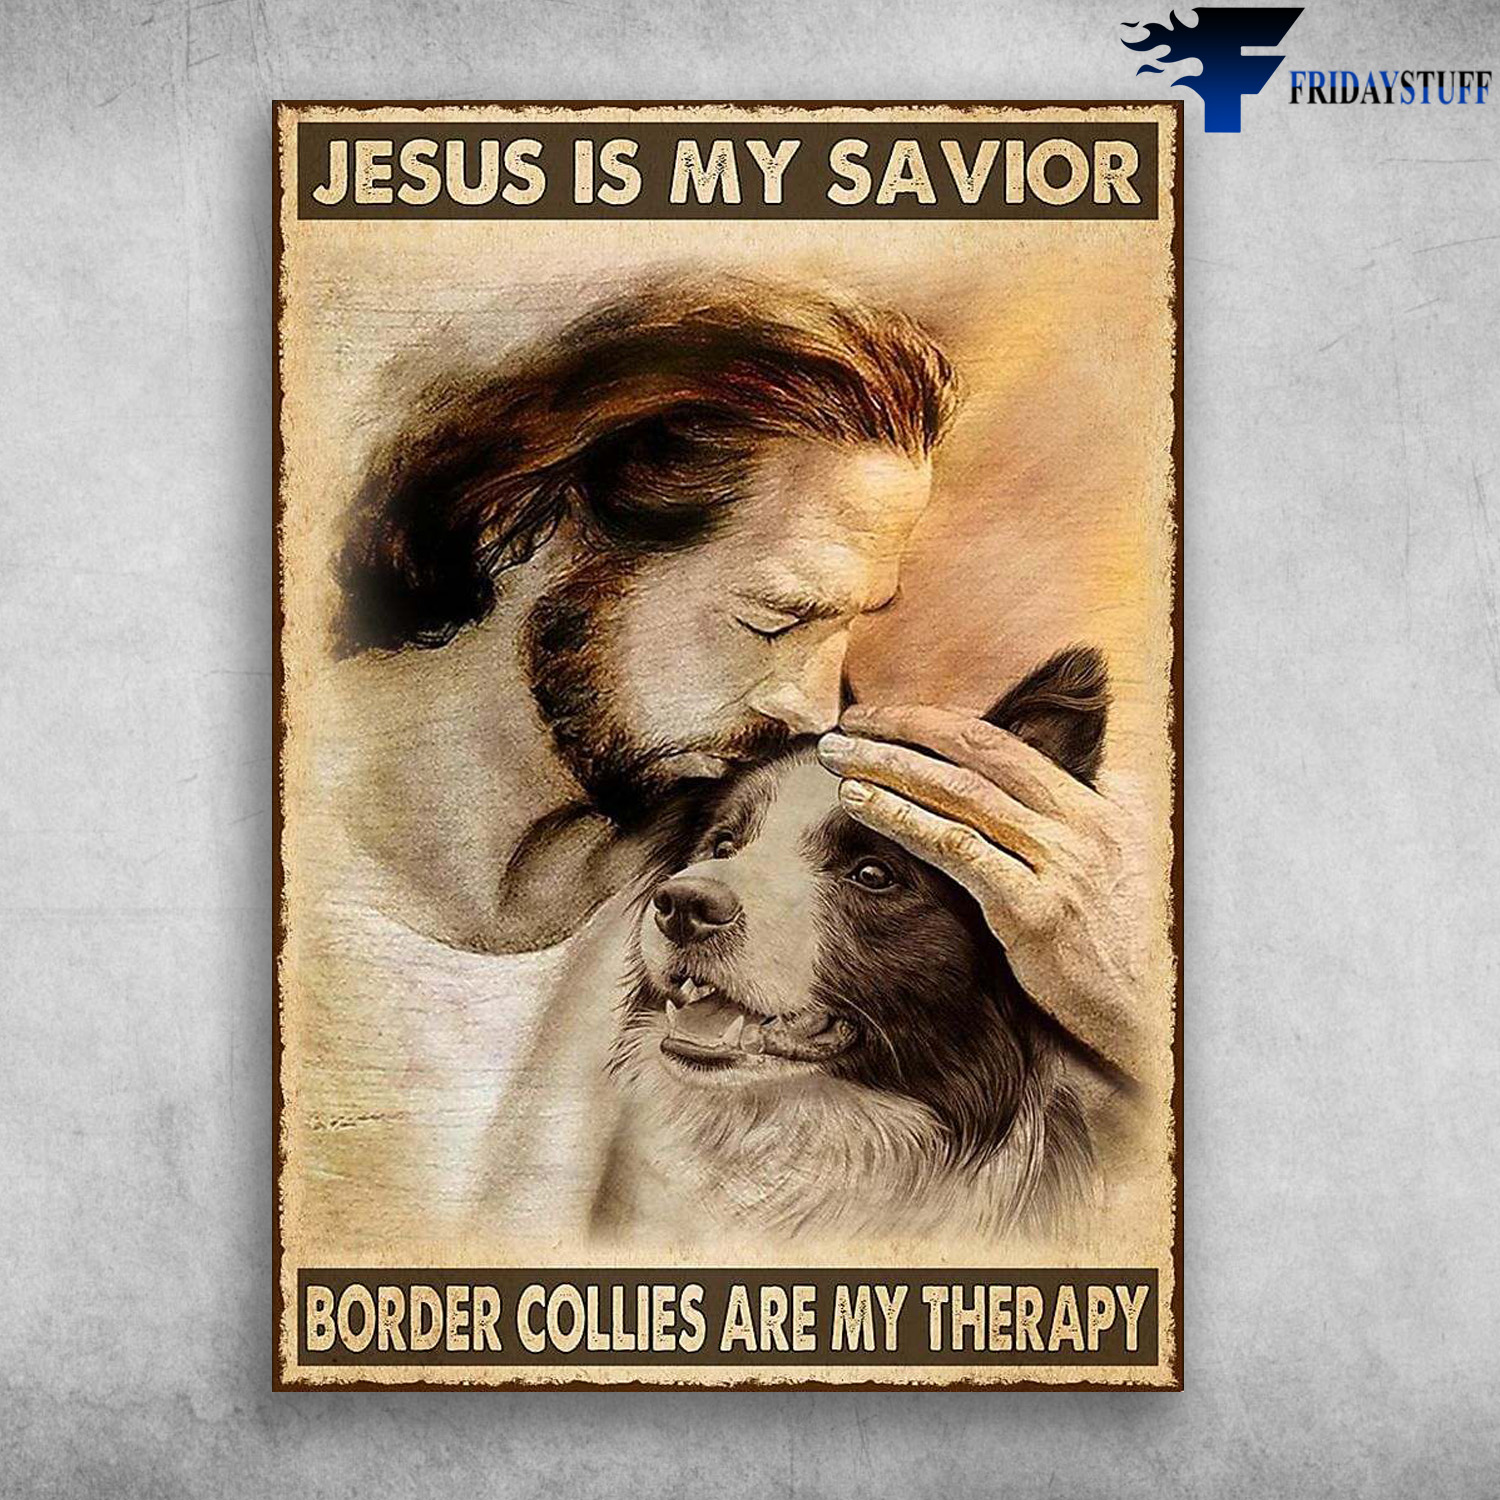 God Loves Border Collies - Jesus Is My Savior, Border Collies Are My Therapy